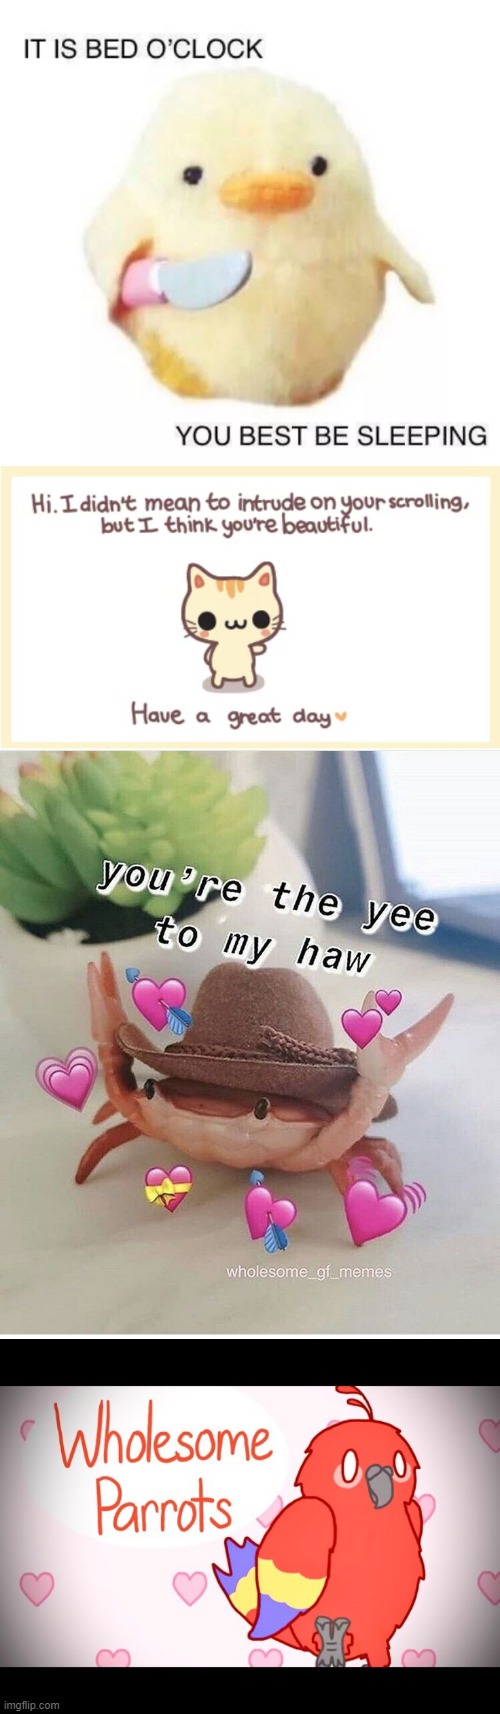 Just sum wholesome UwUness to make your day better my friends | image tagged in wholesome,uwu,kawaii,stuff,tgif,happiness noise | made w/ Imgflip meme maker